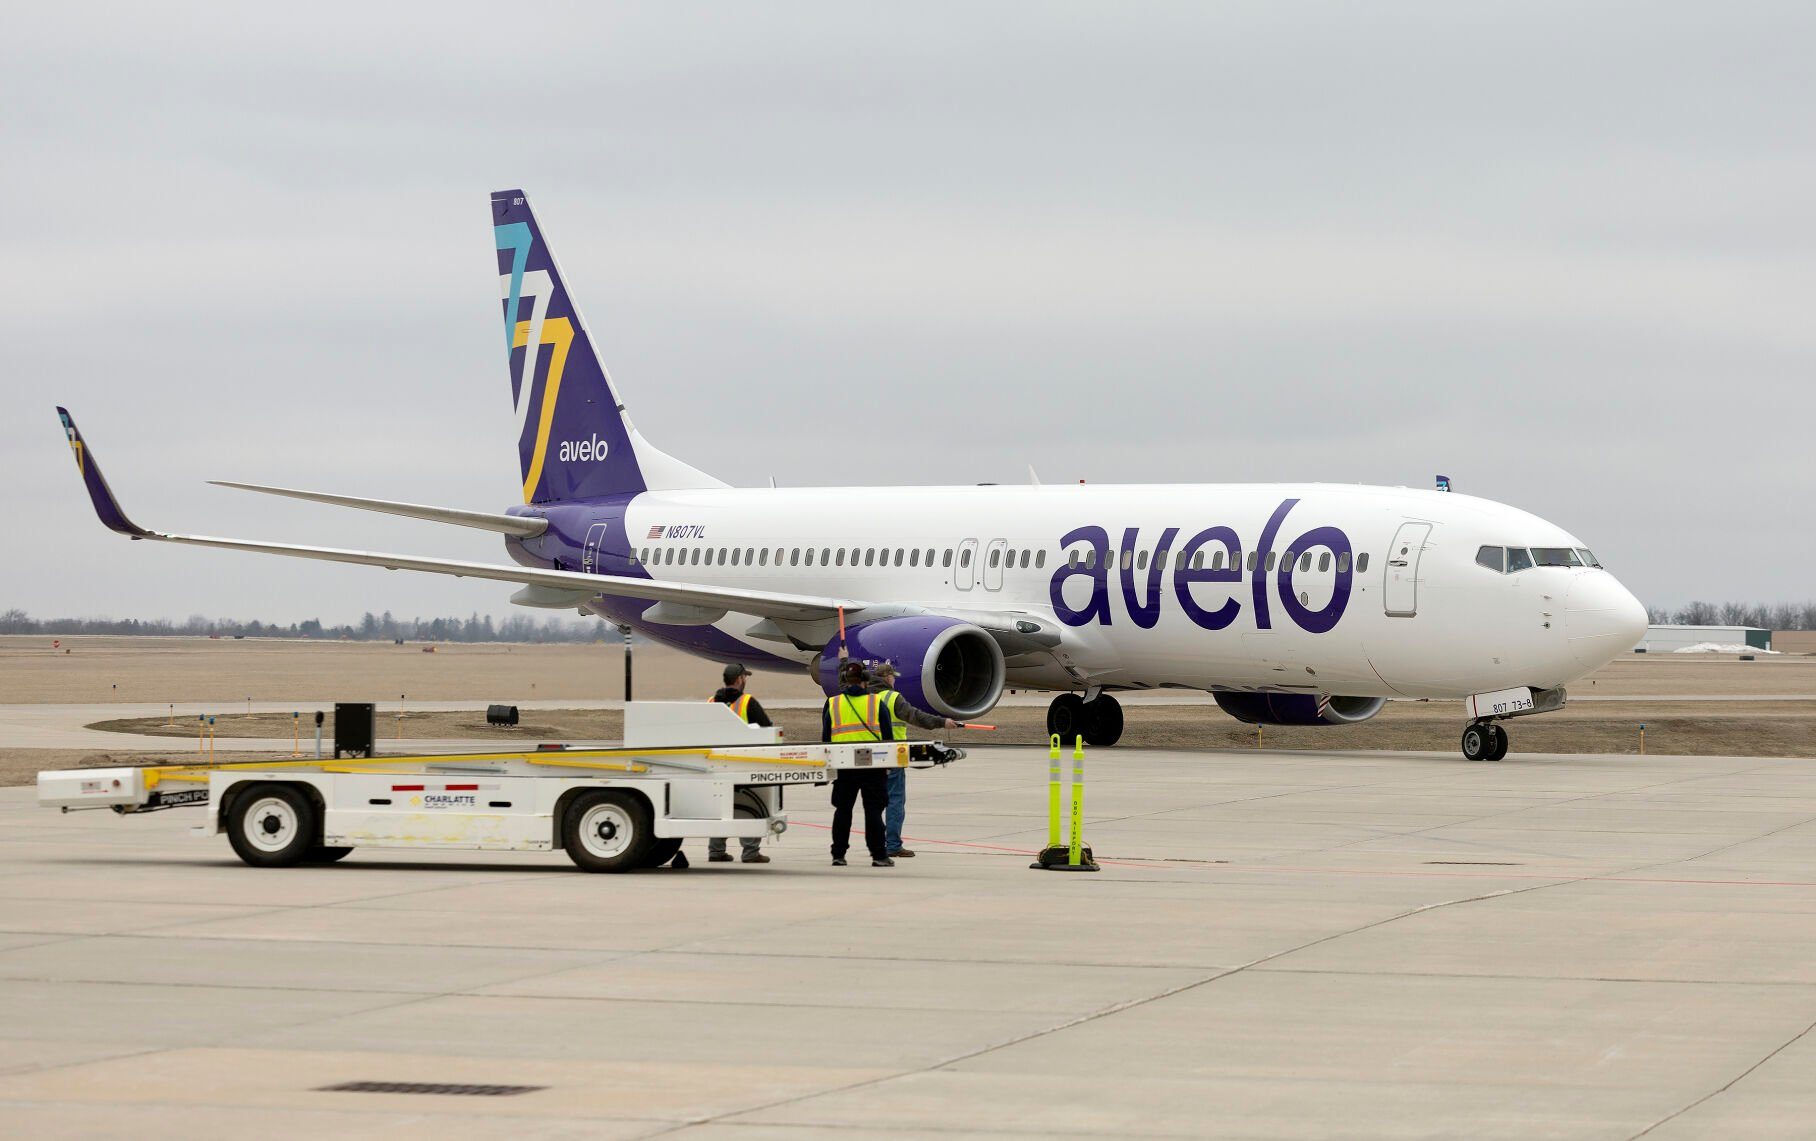 An Avelo Airlines jet taxis down the runway after touching down at Dubuque Regional Airport for Avelo’s inaugural local flight on Wednesday.    PHOTO CREDIT: Gassman